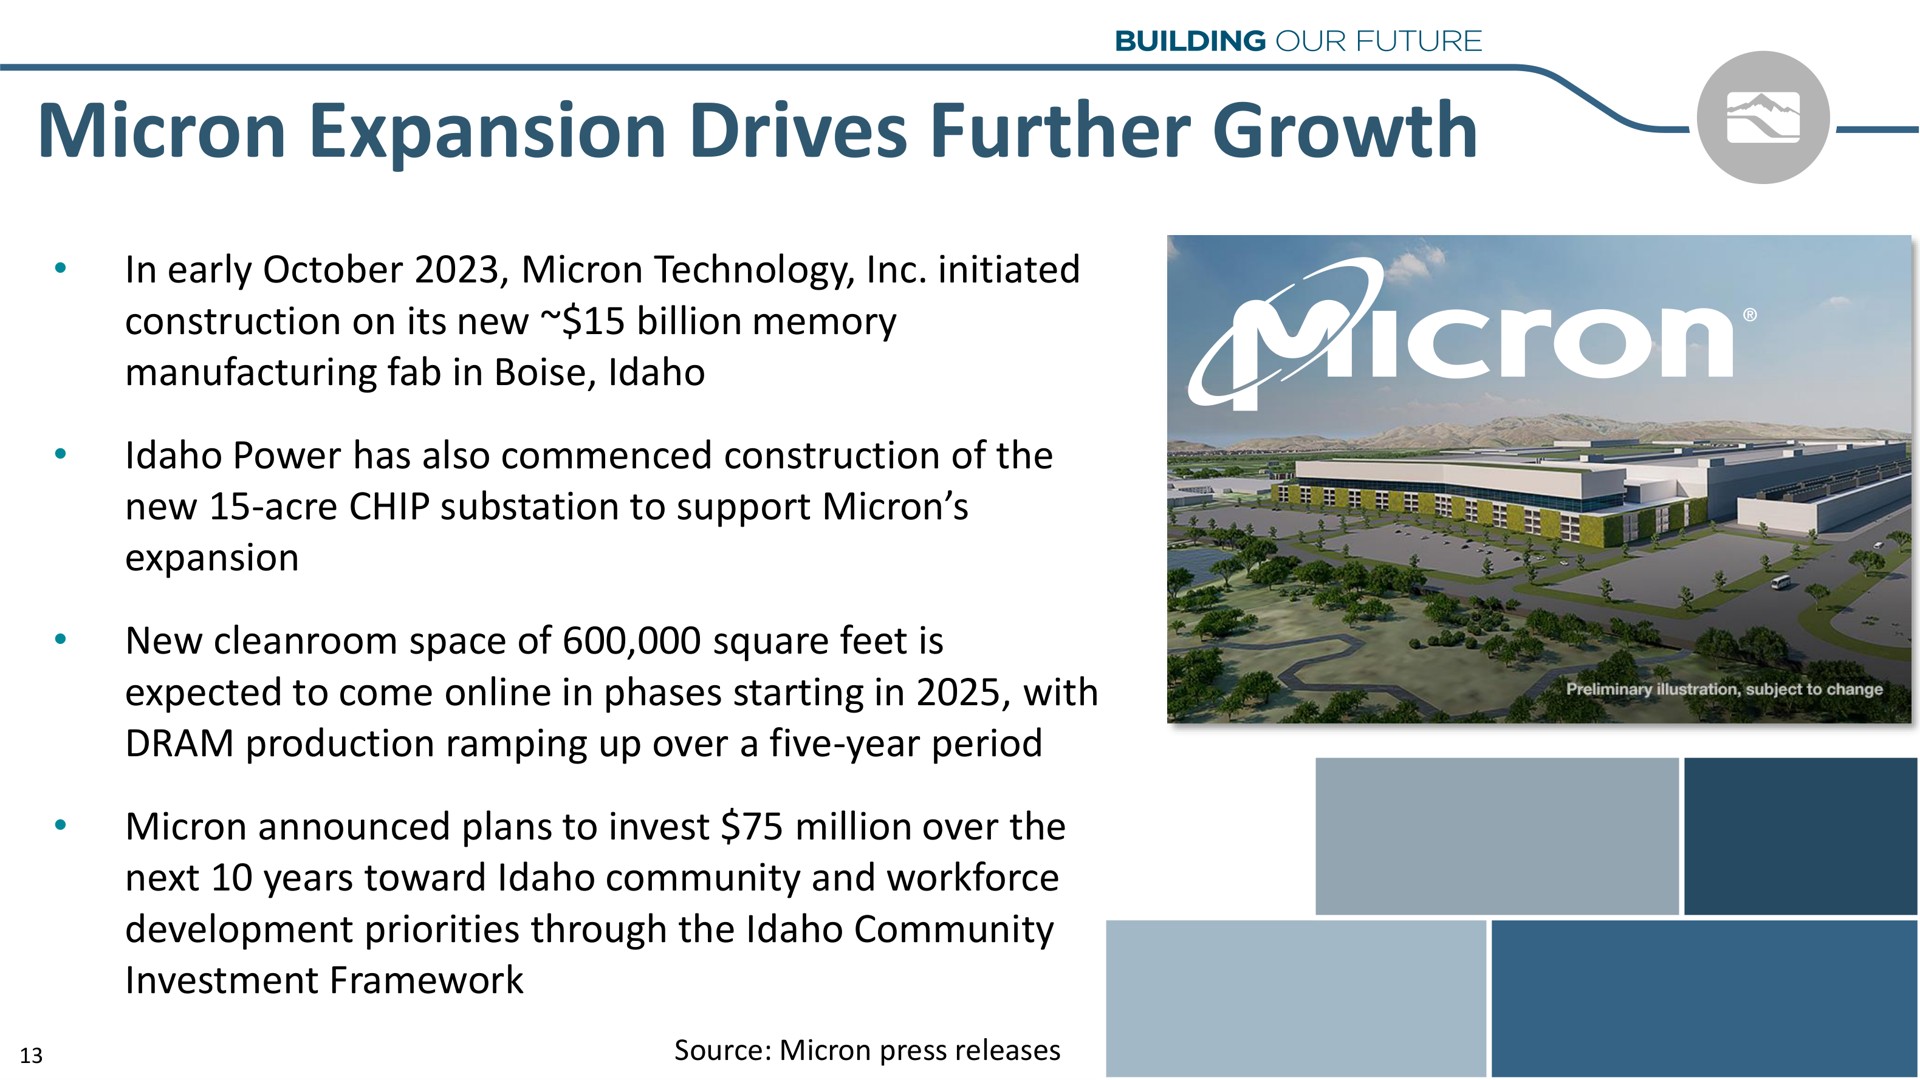 micron expansion drives further growth | Idacorp